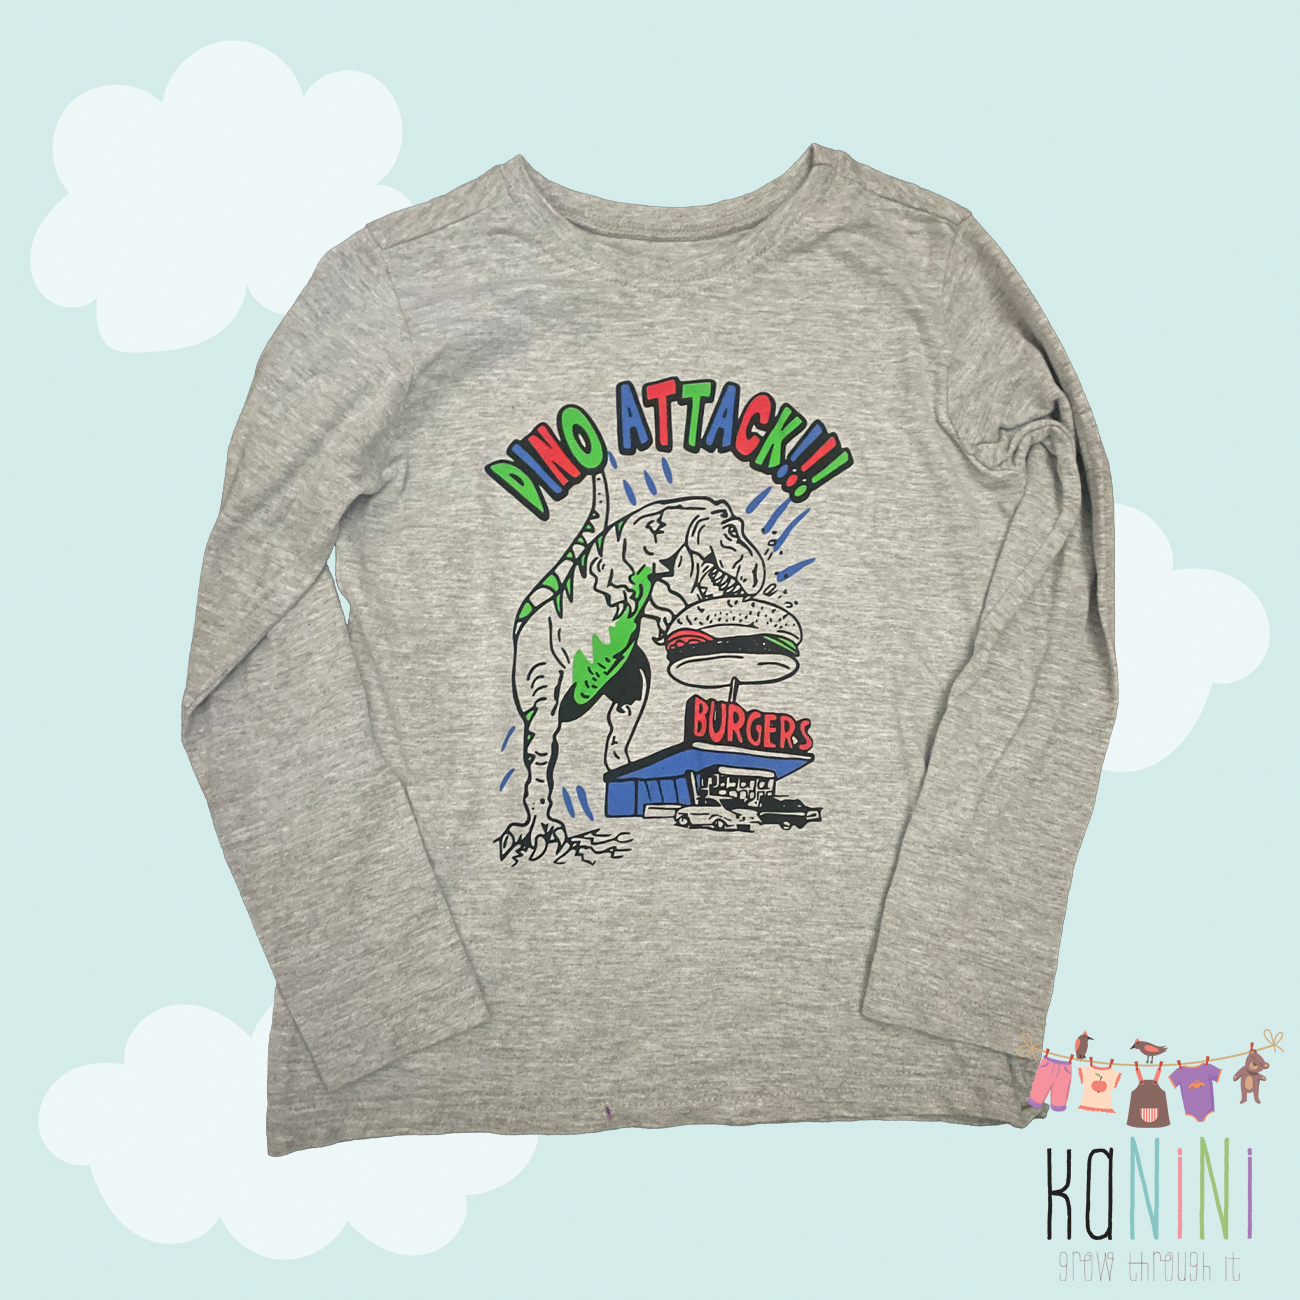 Featured image for “Pop Candy 6 - 7 Years Boys Long Sleeve T-Shirt”